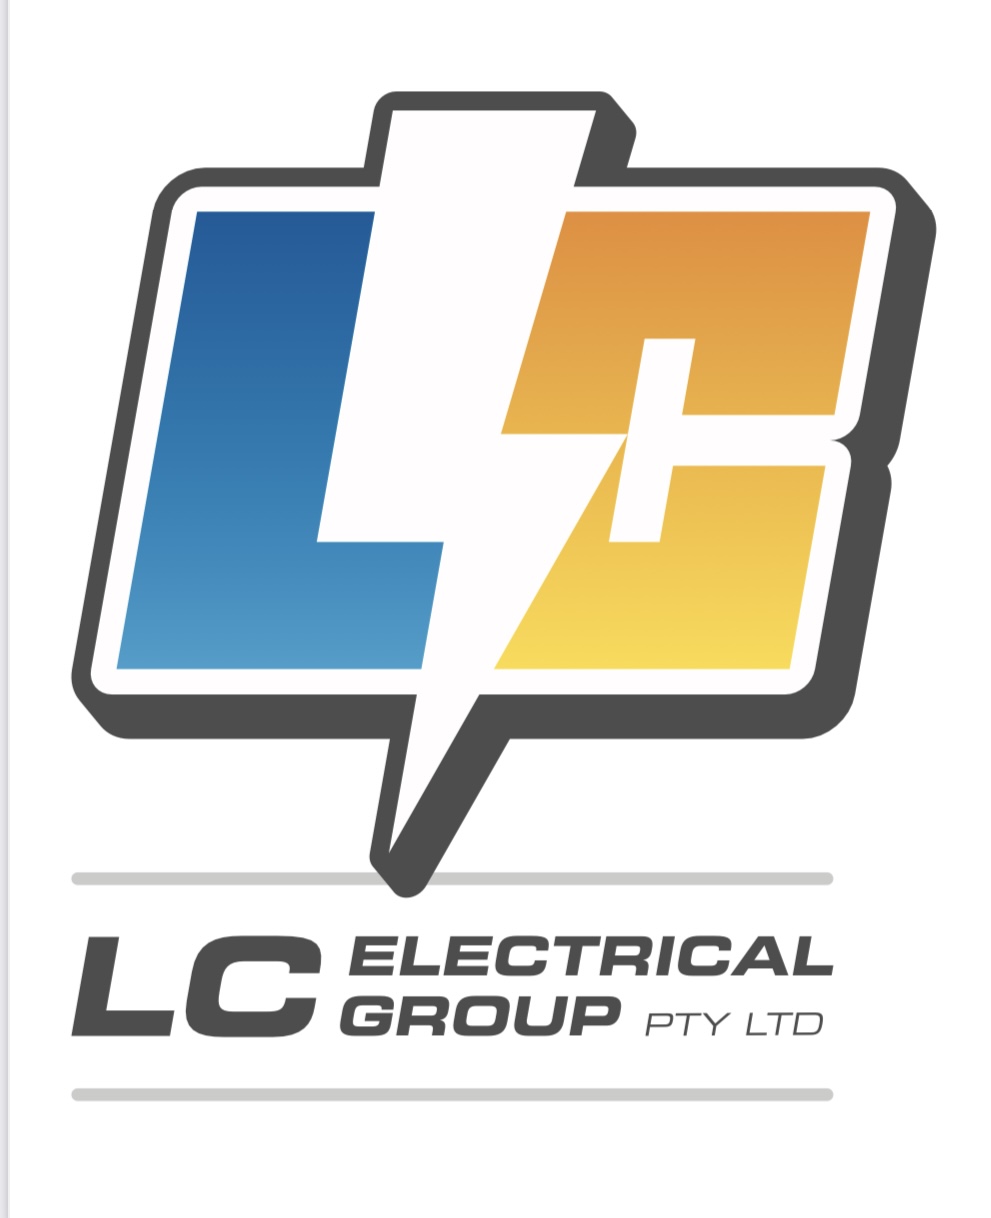 LC Electrical Group Pty Ltd